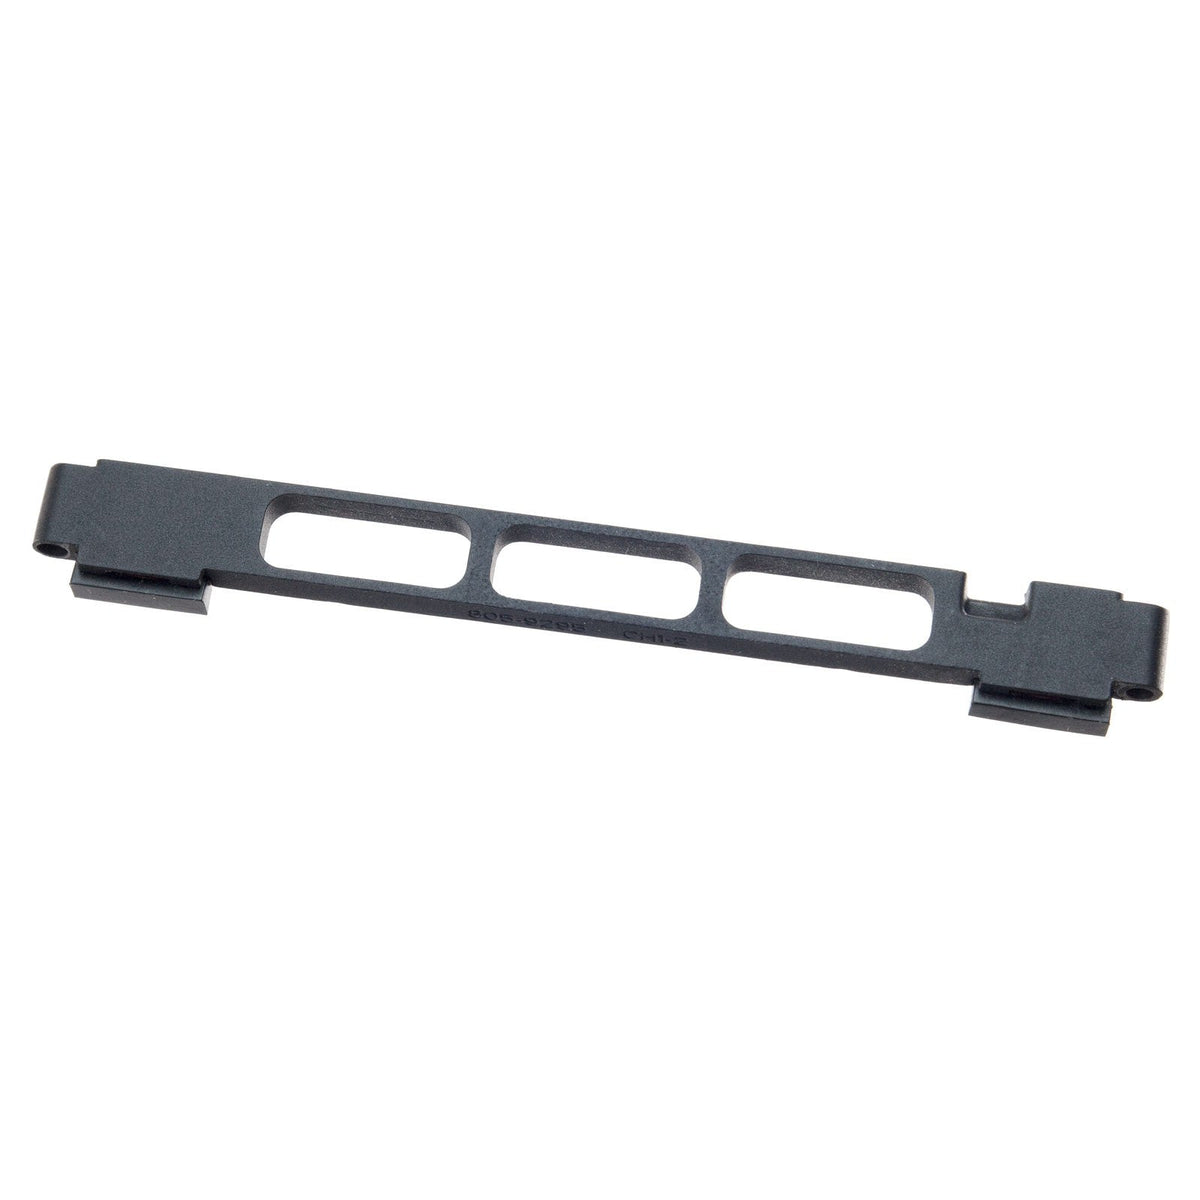 FRONT HARD DRIVE BRACKET FOR MACBOOK PRO 17" UNIBODY A1297 (EARLY 2009-LATE 2011)